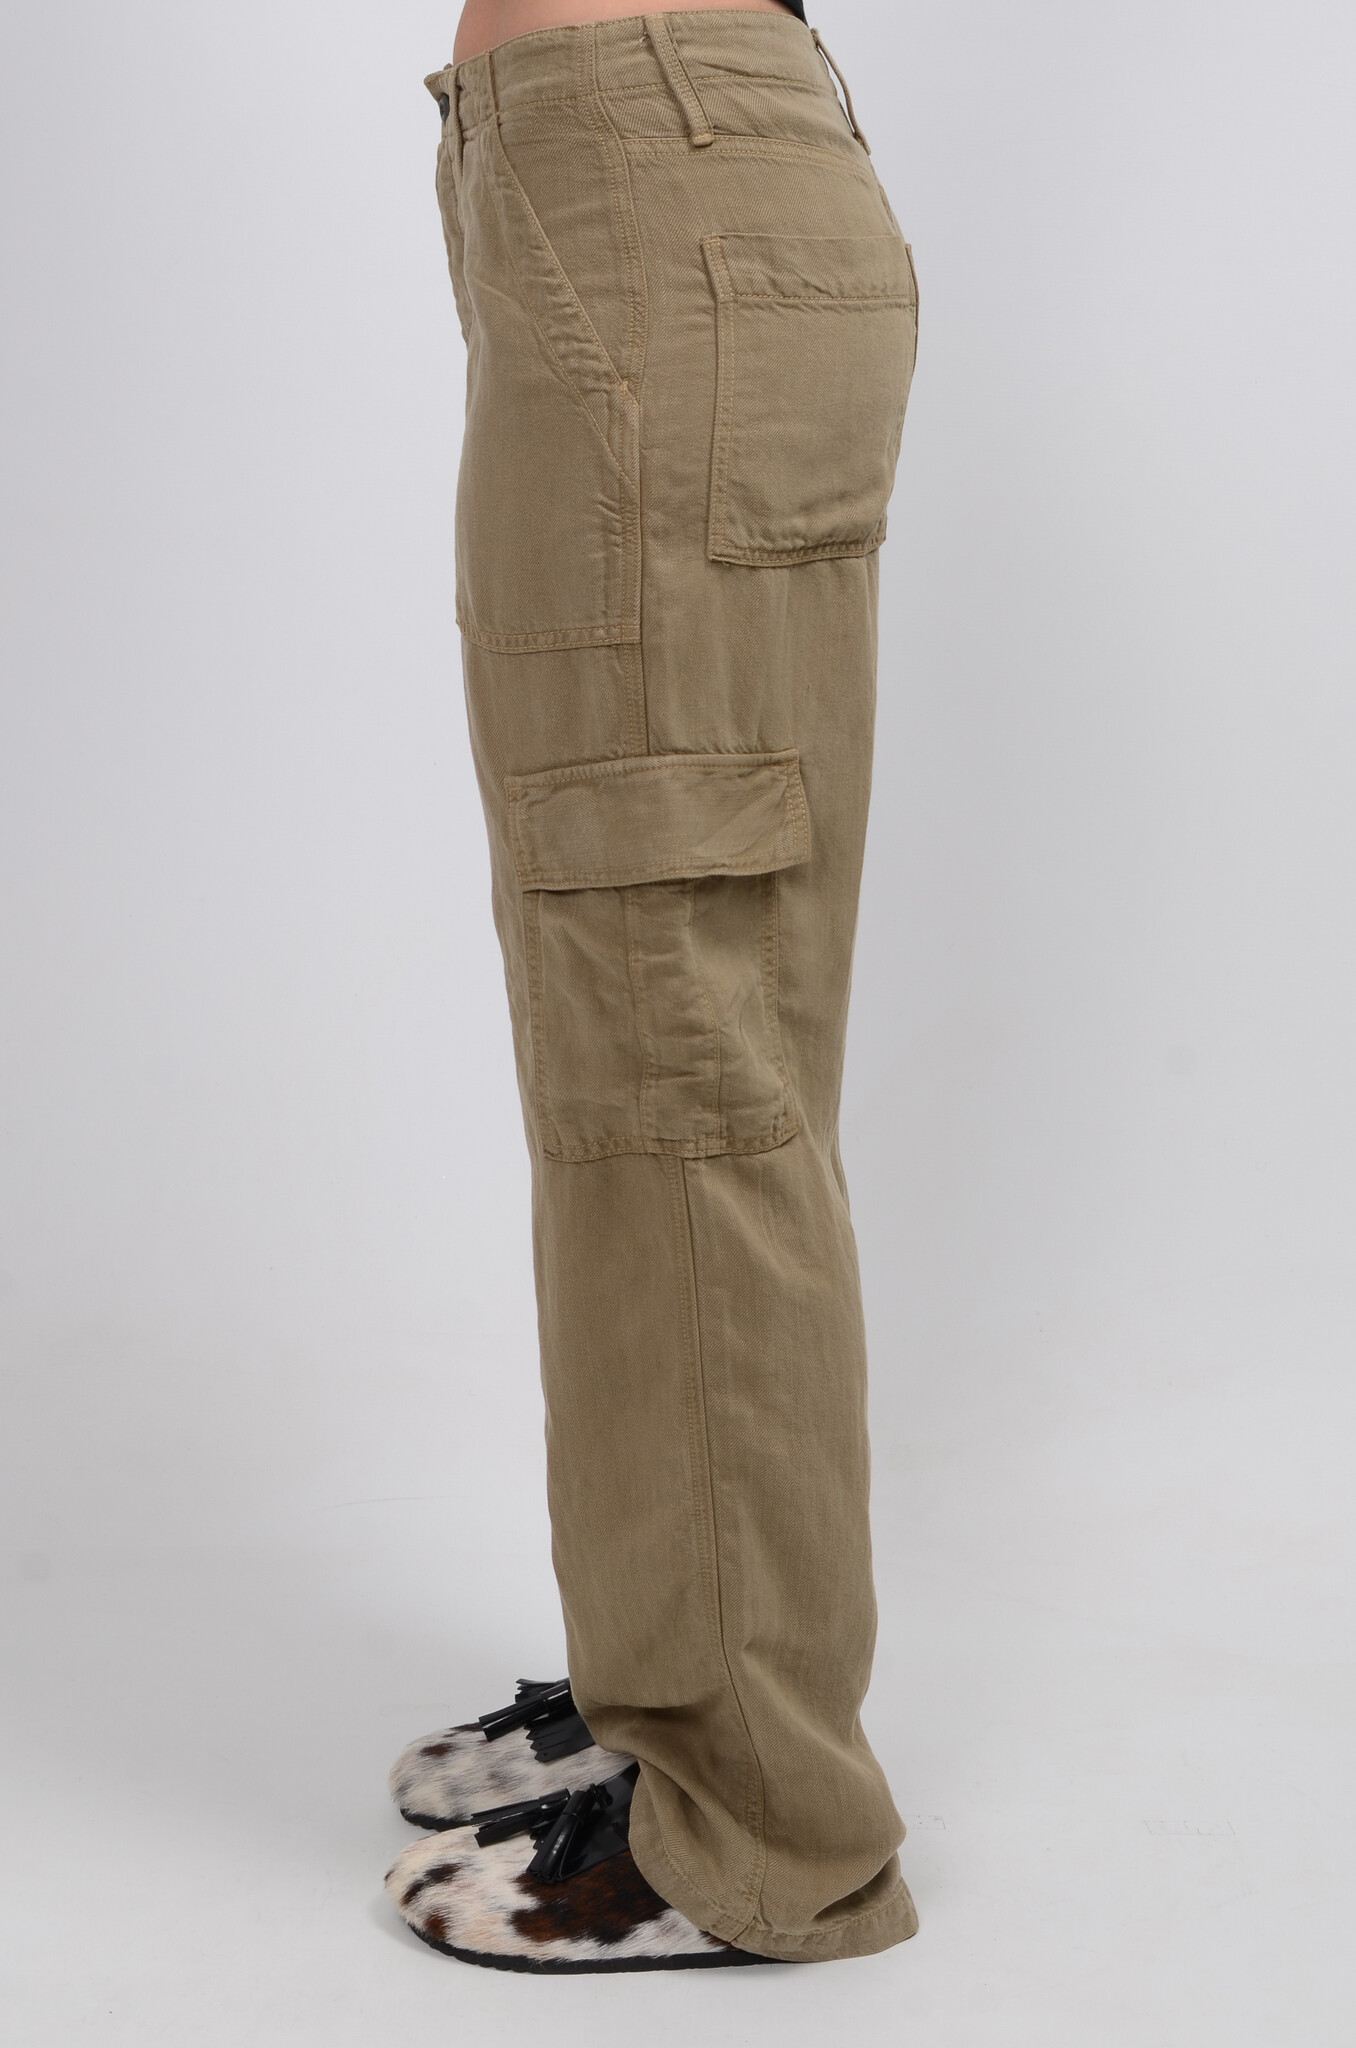 Mother Women's The Private Cargo Pants - Gothic Olive - Size 27